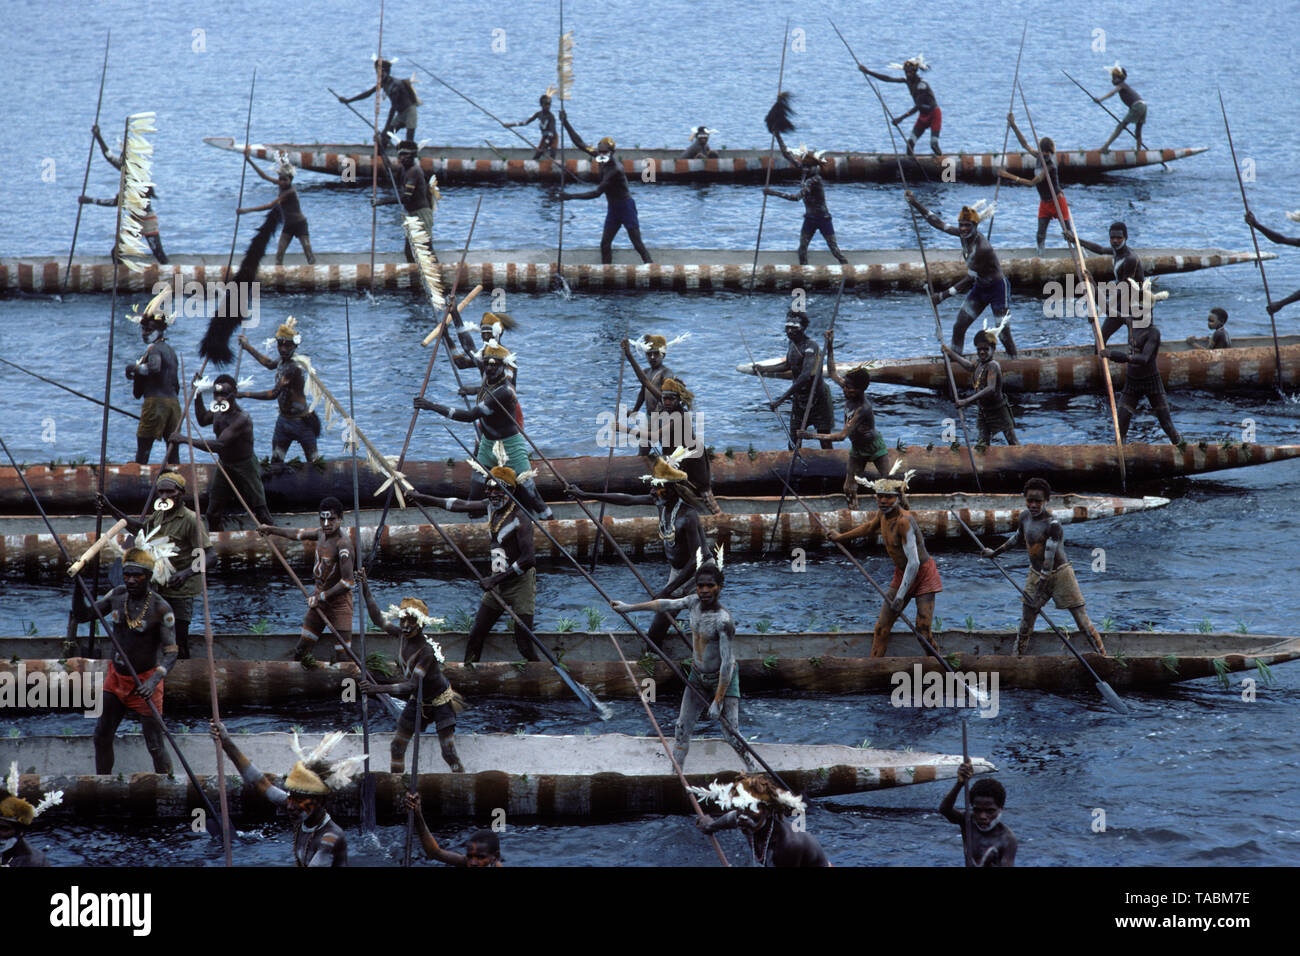 Asmat people: ethnic group living in the Papua province of Indonesia, along the Arafura Sea.  Display of canoes at Agats- Sjuru. Photograph taken by F Stock Photo